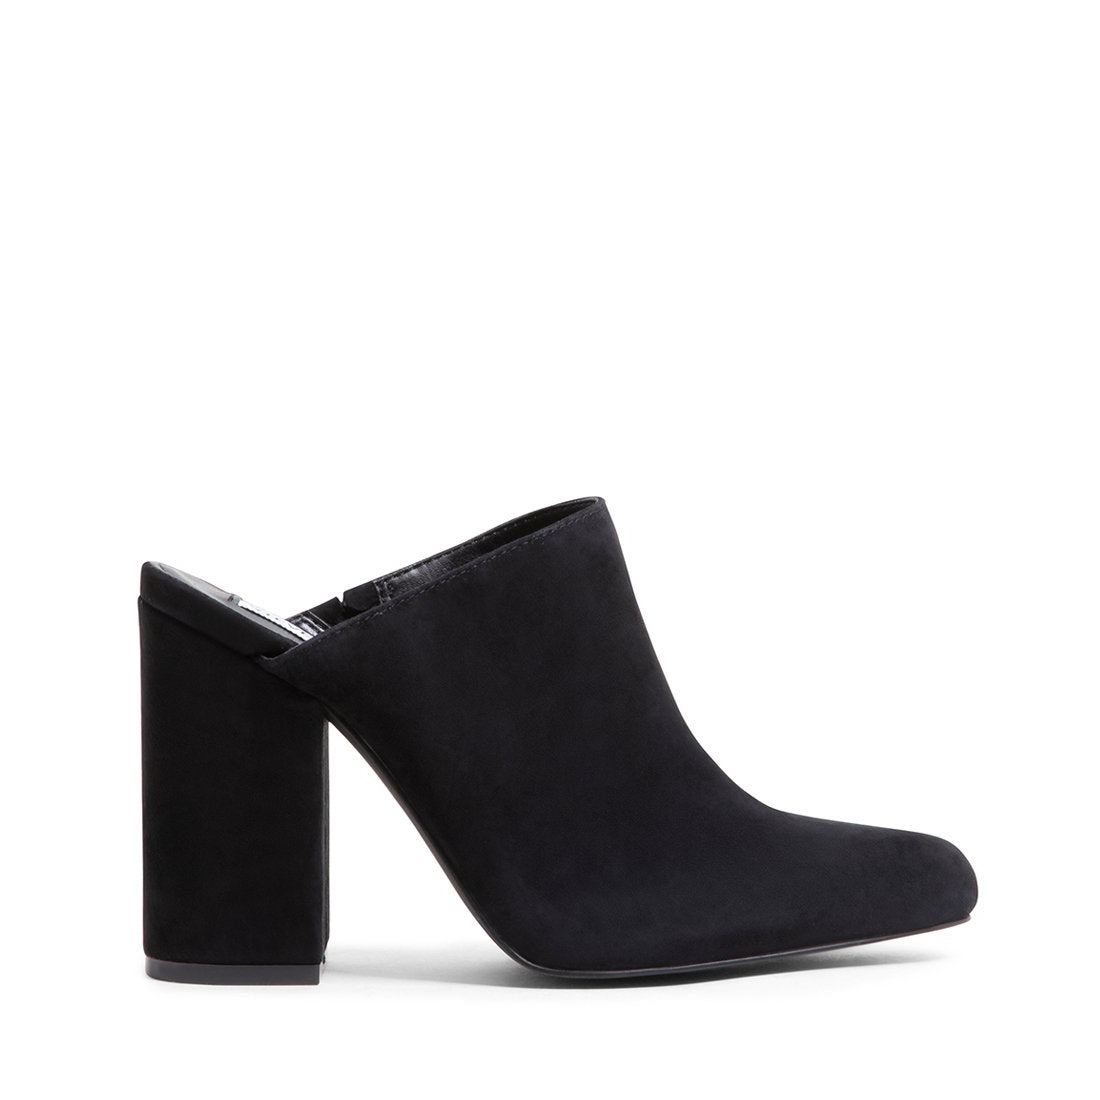 DITTY BLACK SUEDE – Steve Madden Canada